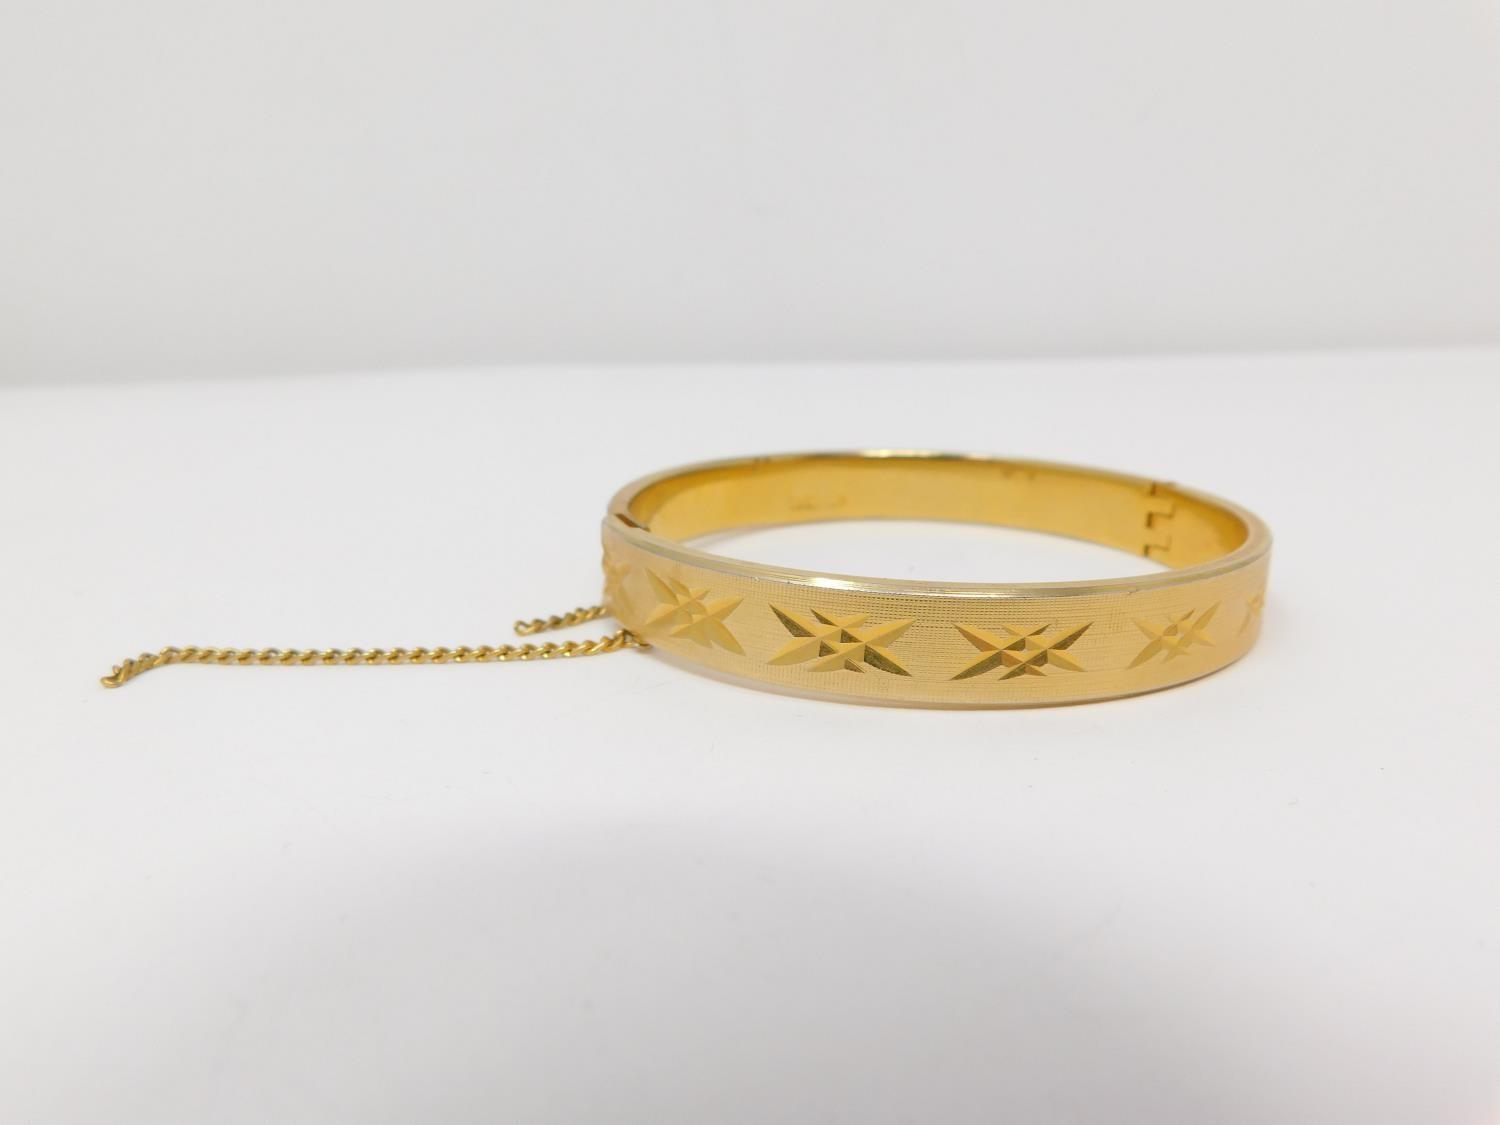 A collection of vintage jewellery inlcuding an 18 carat rolled gold bangle with star cur design, a - Image 16 of 28